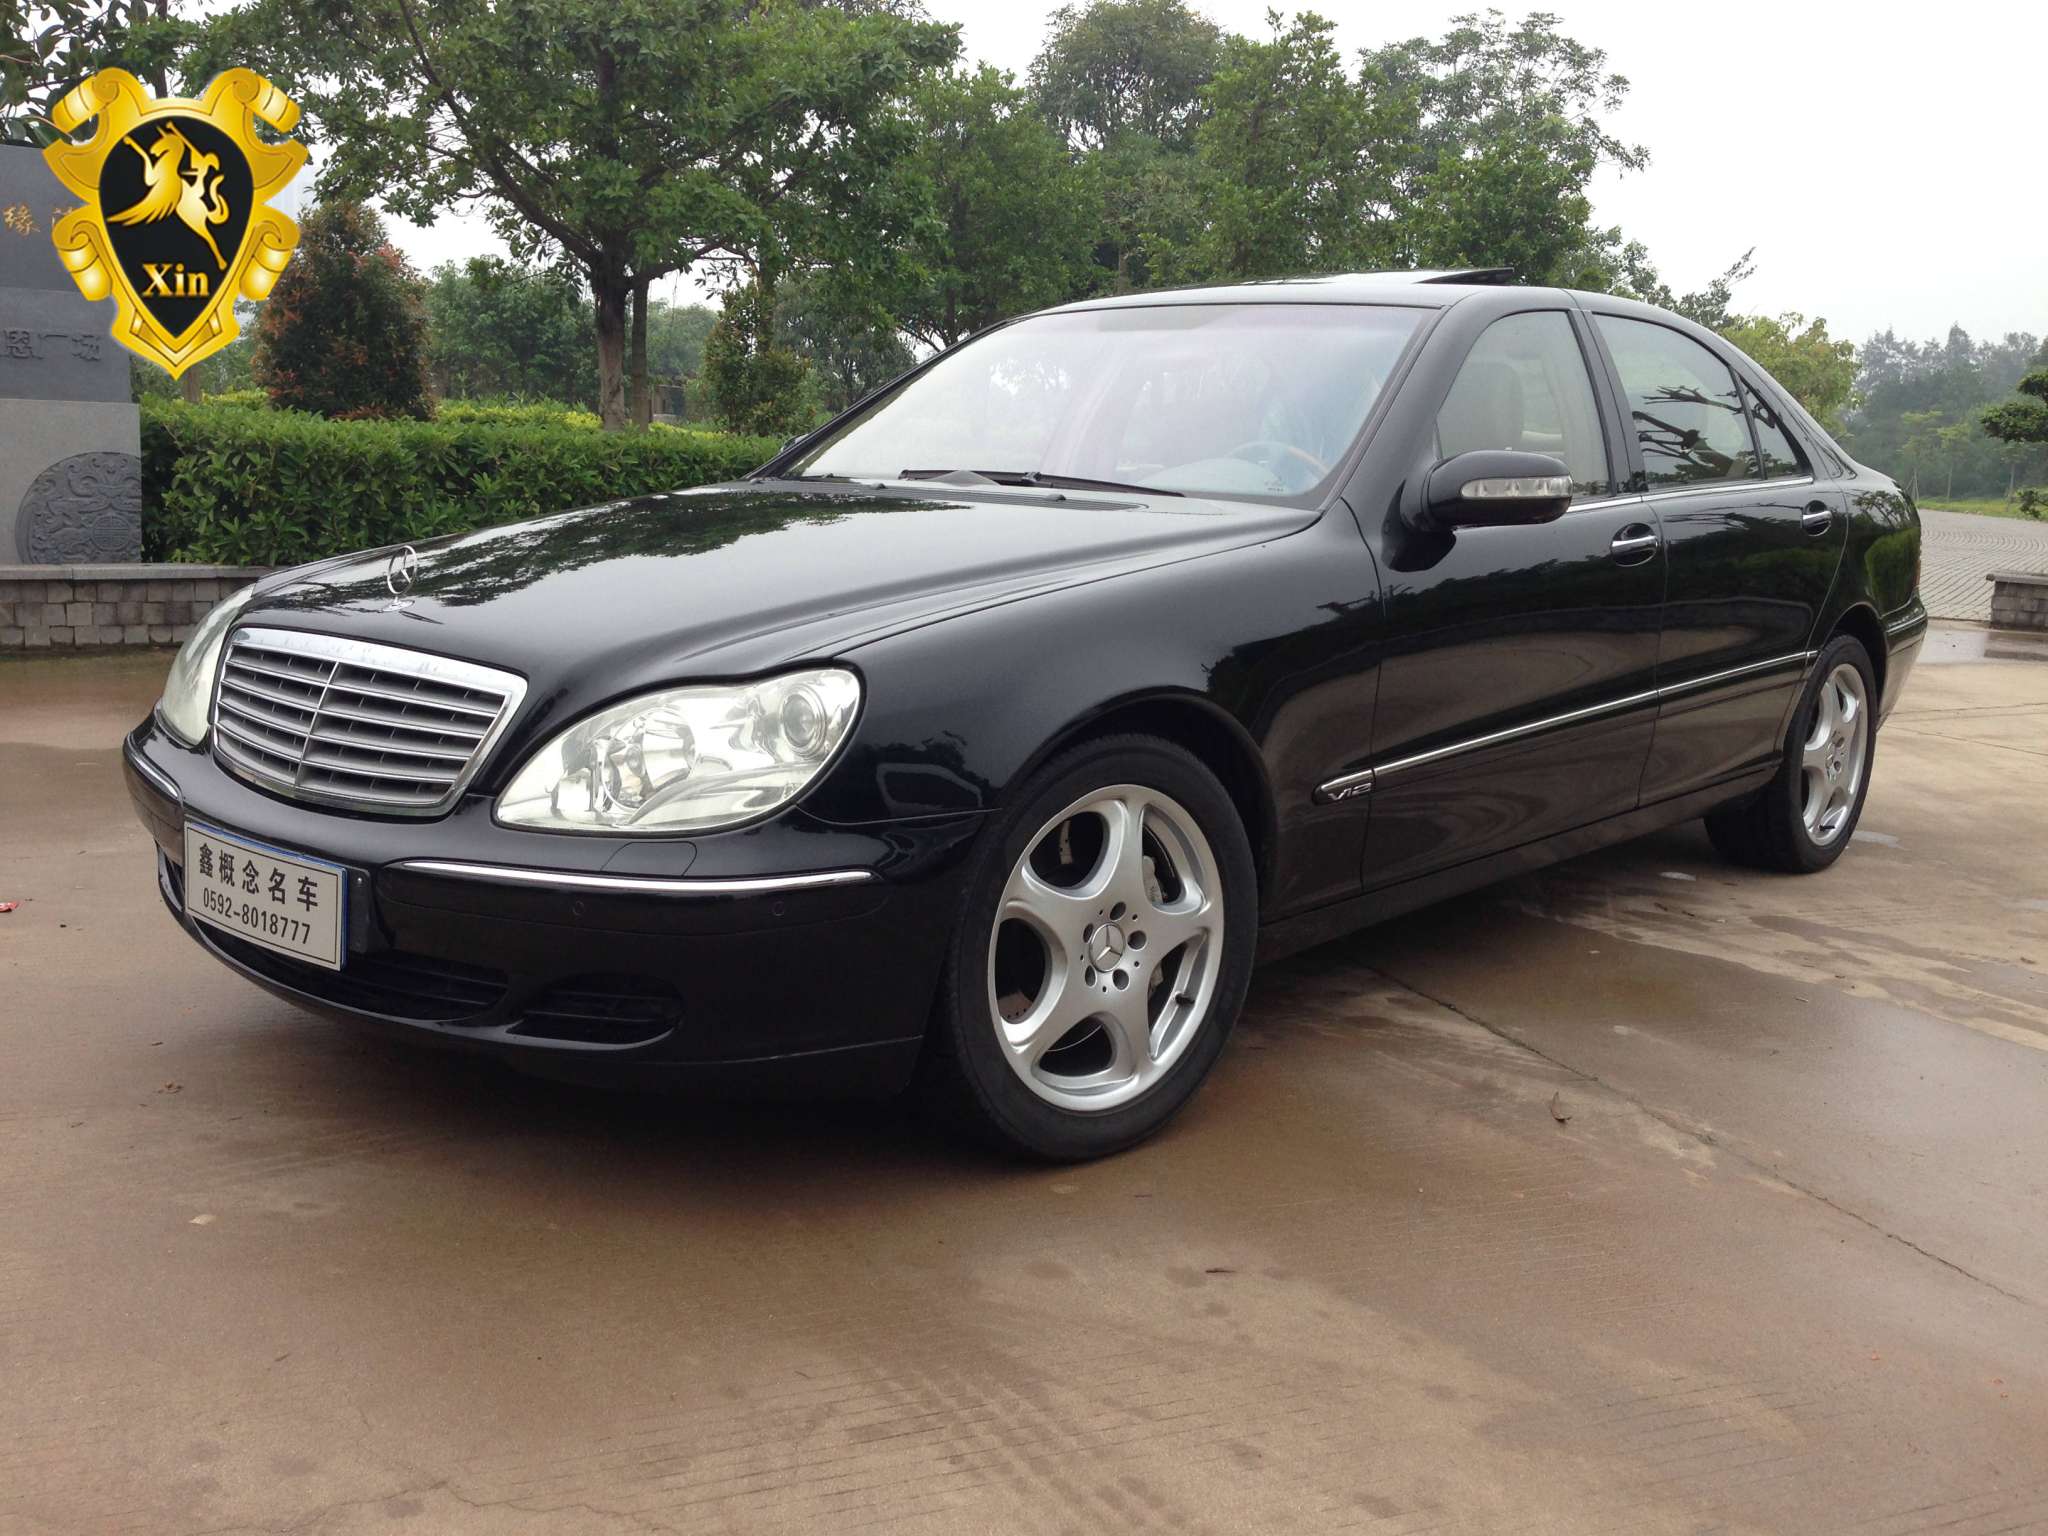 Mercedes Benz S600 4matic - amazing photo gallery, some information and specifications, as well ...